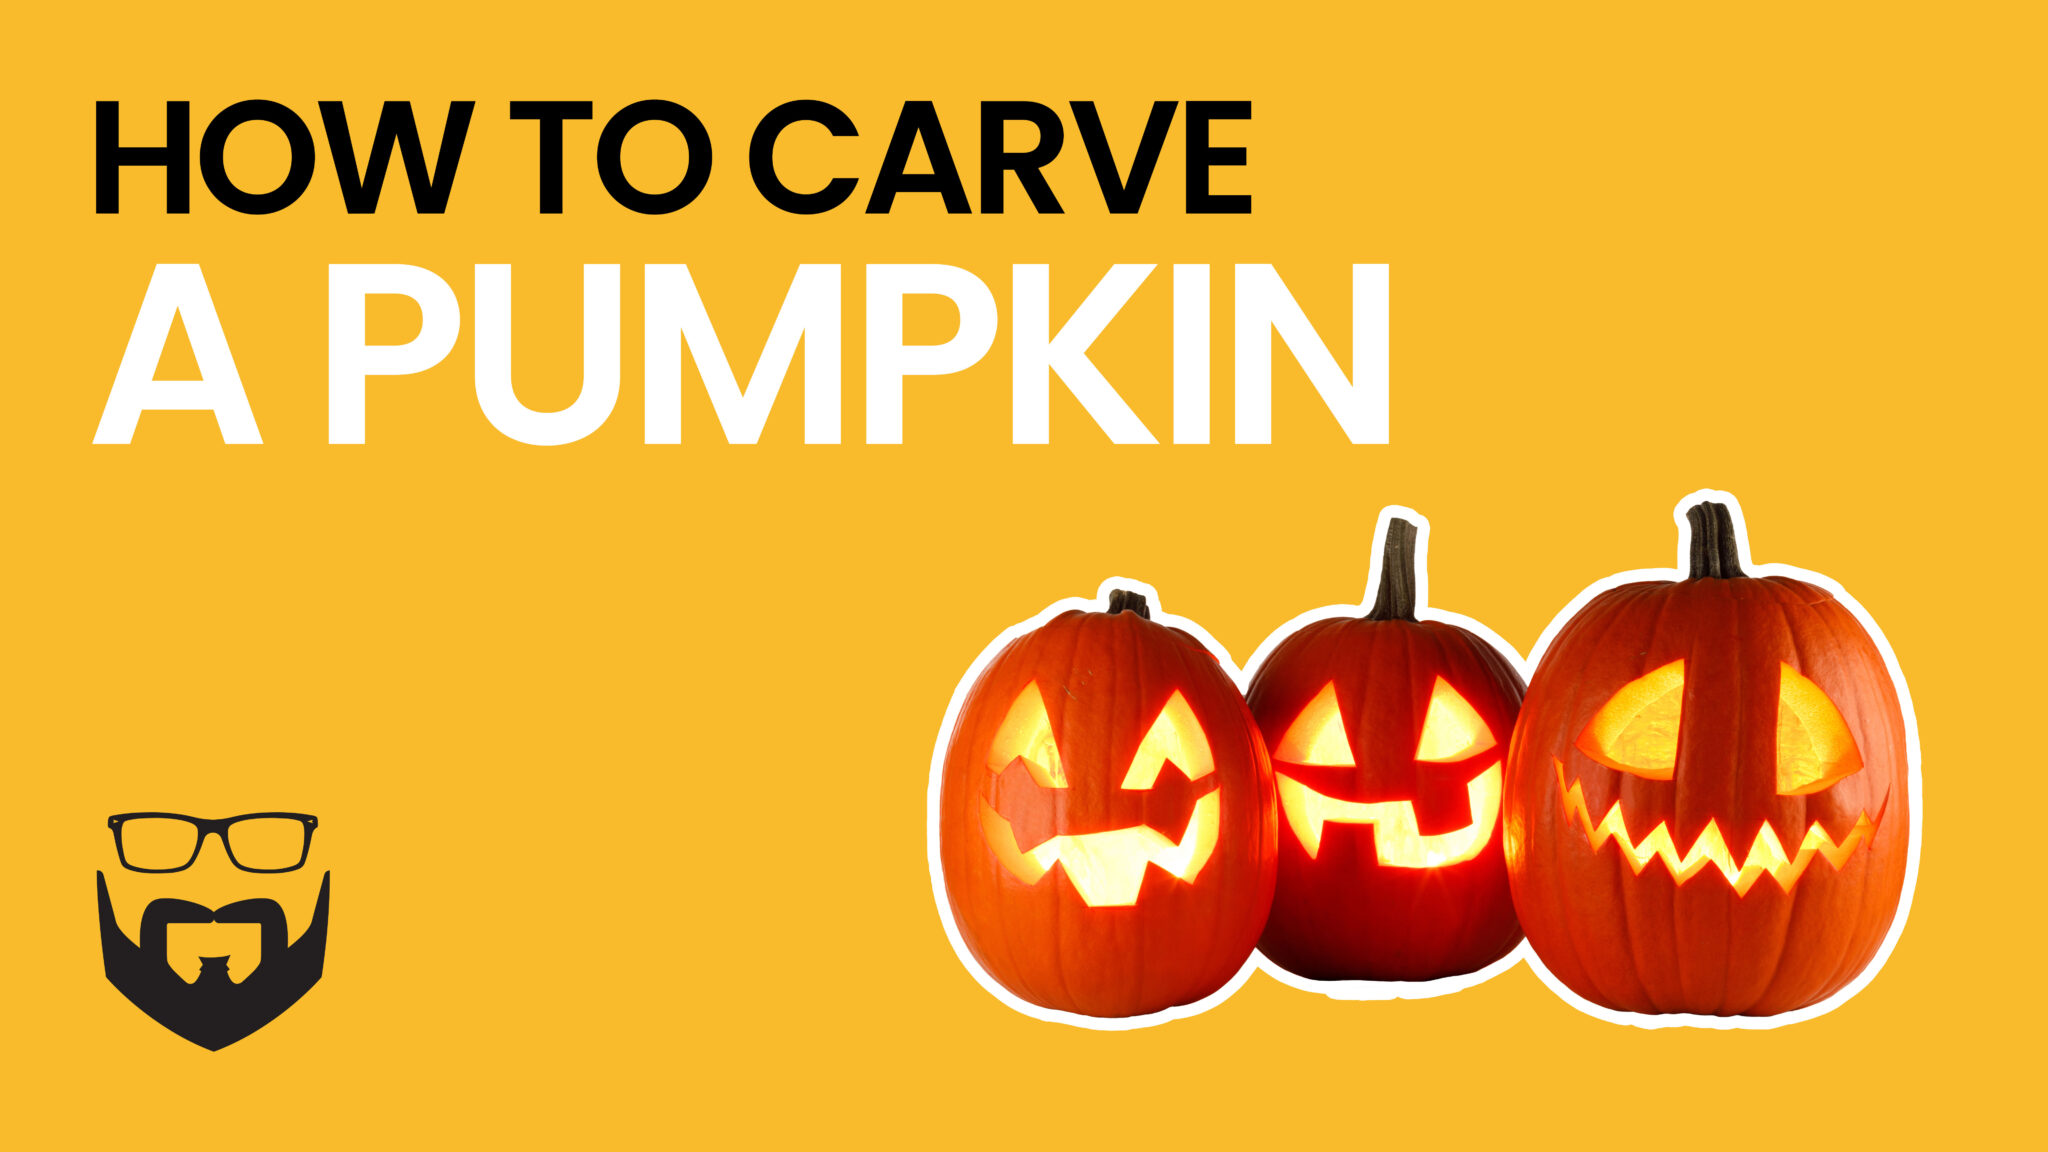 How to Carve a Pumpkin Video - Yellow